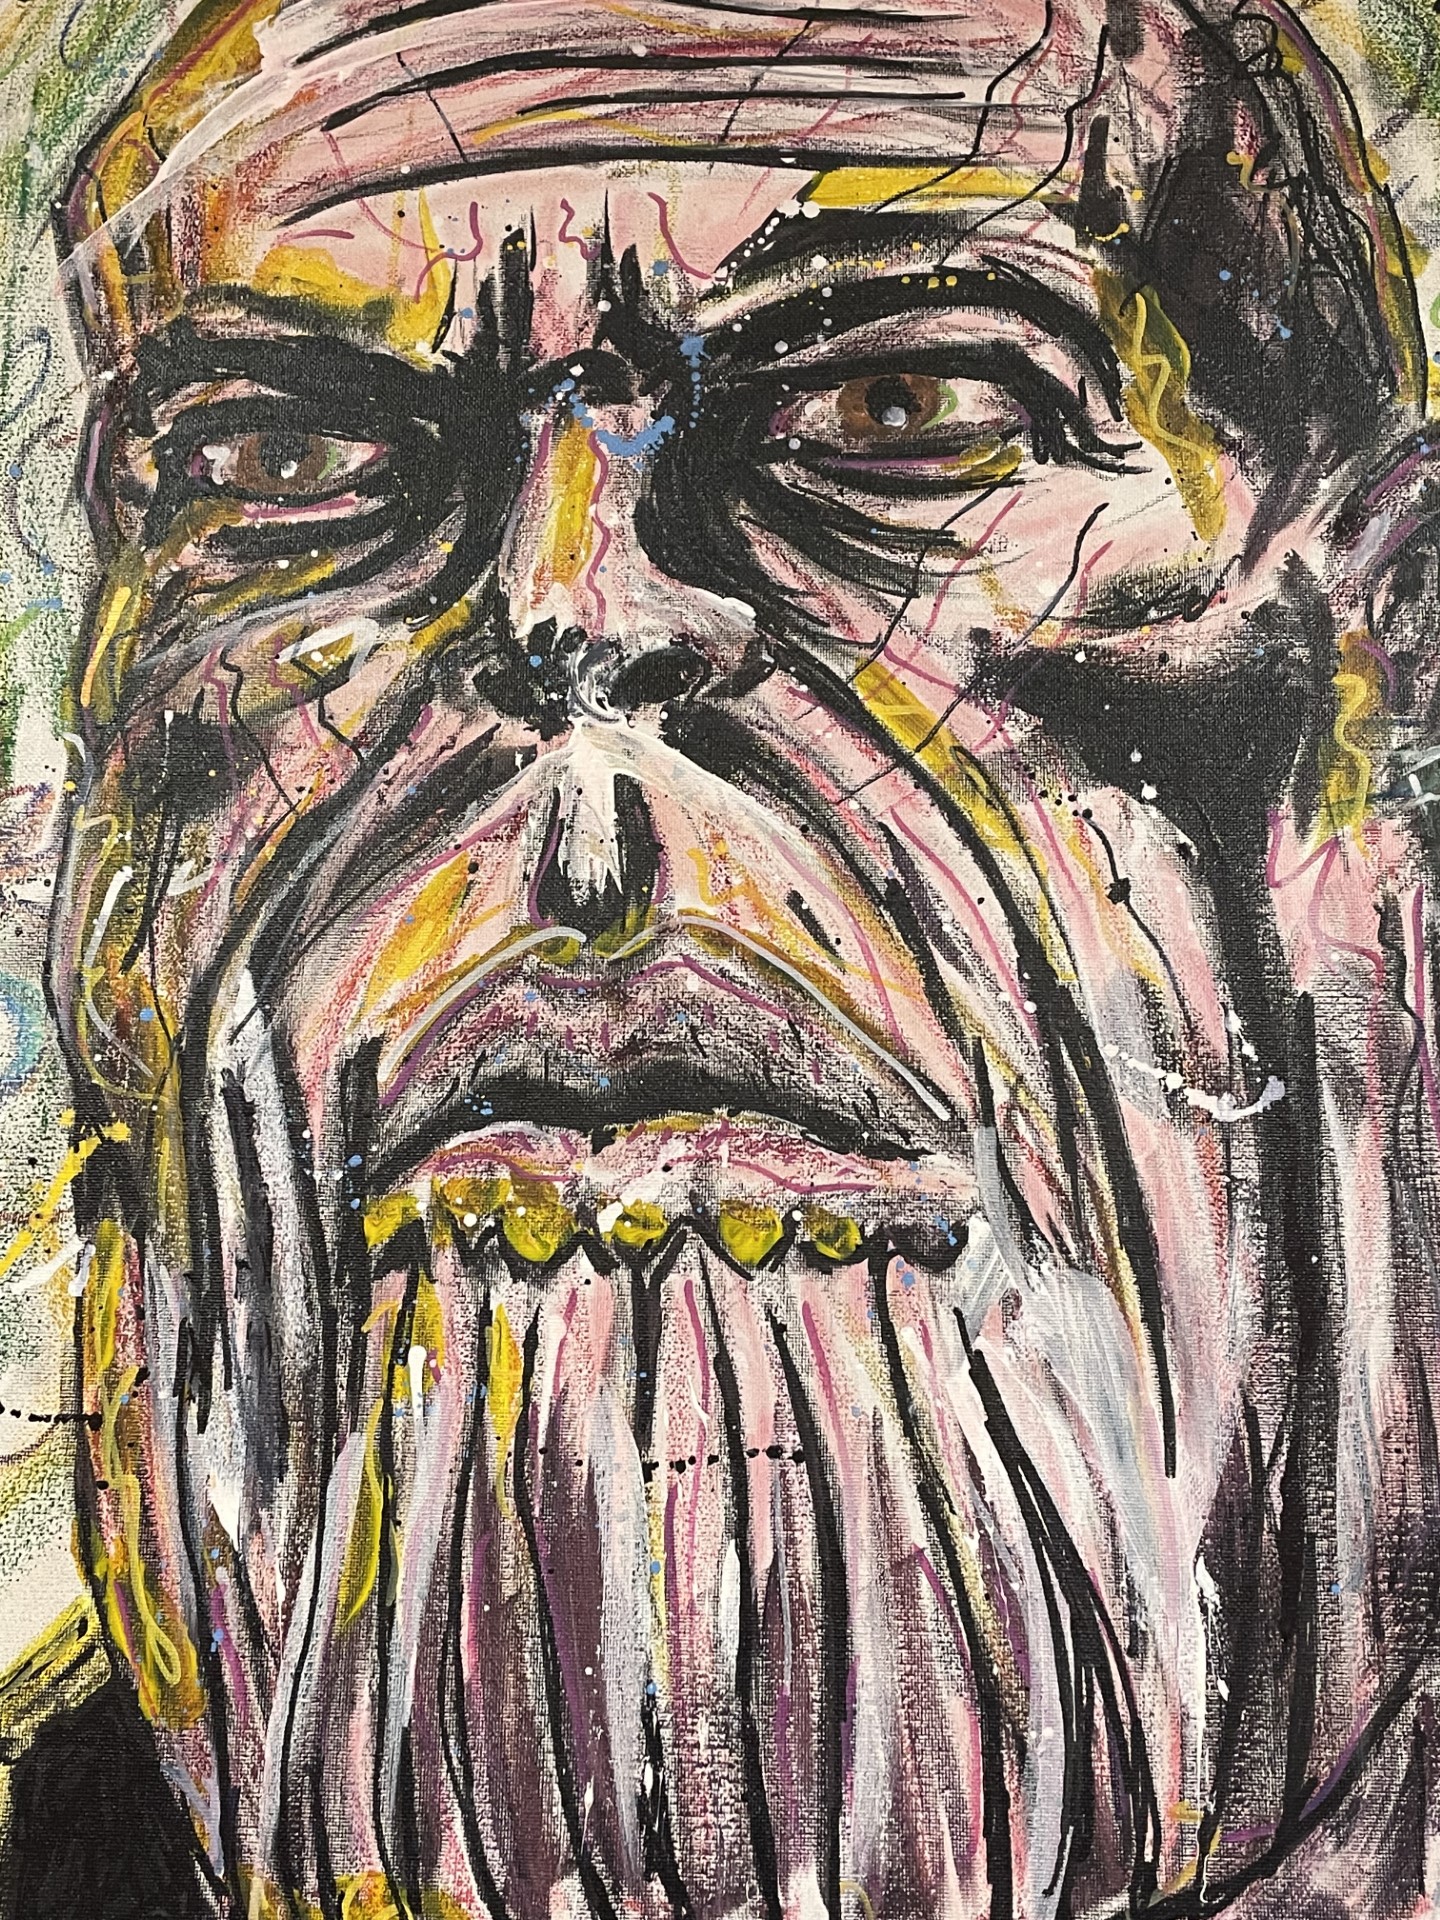 Painting of Thanos from Marvel